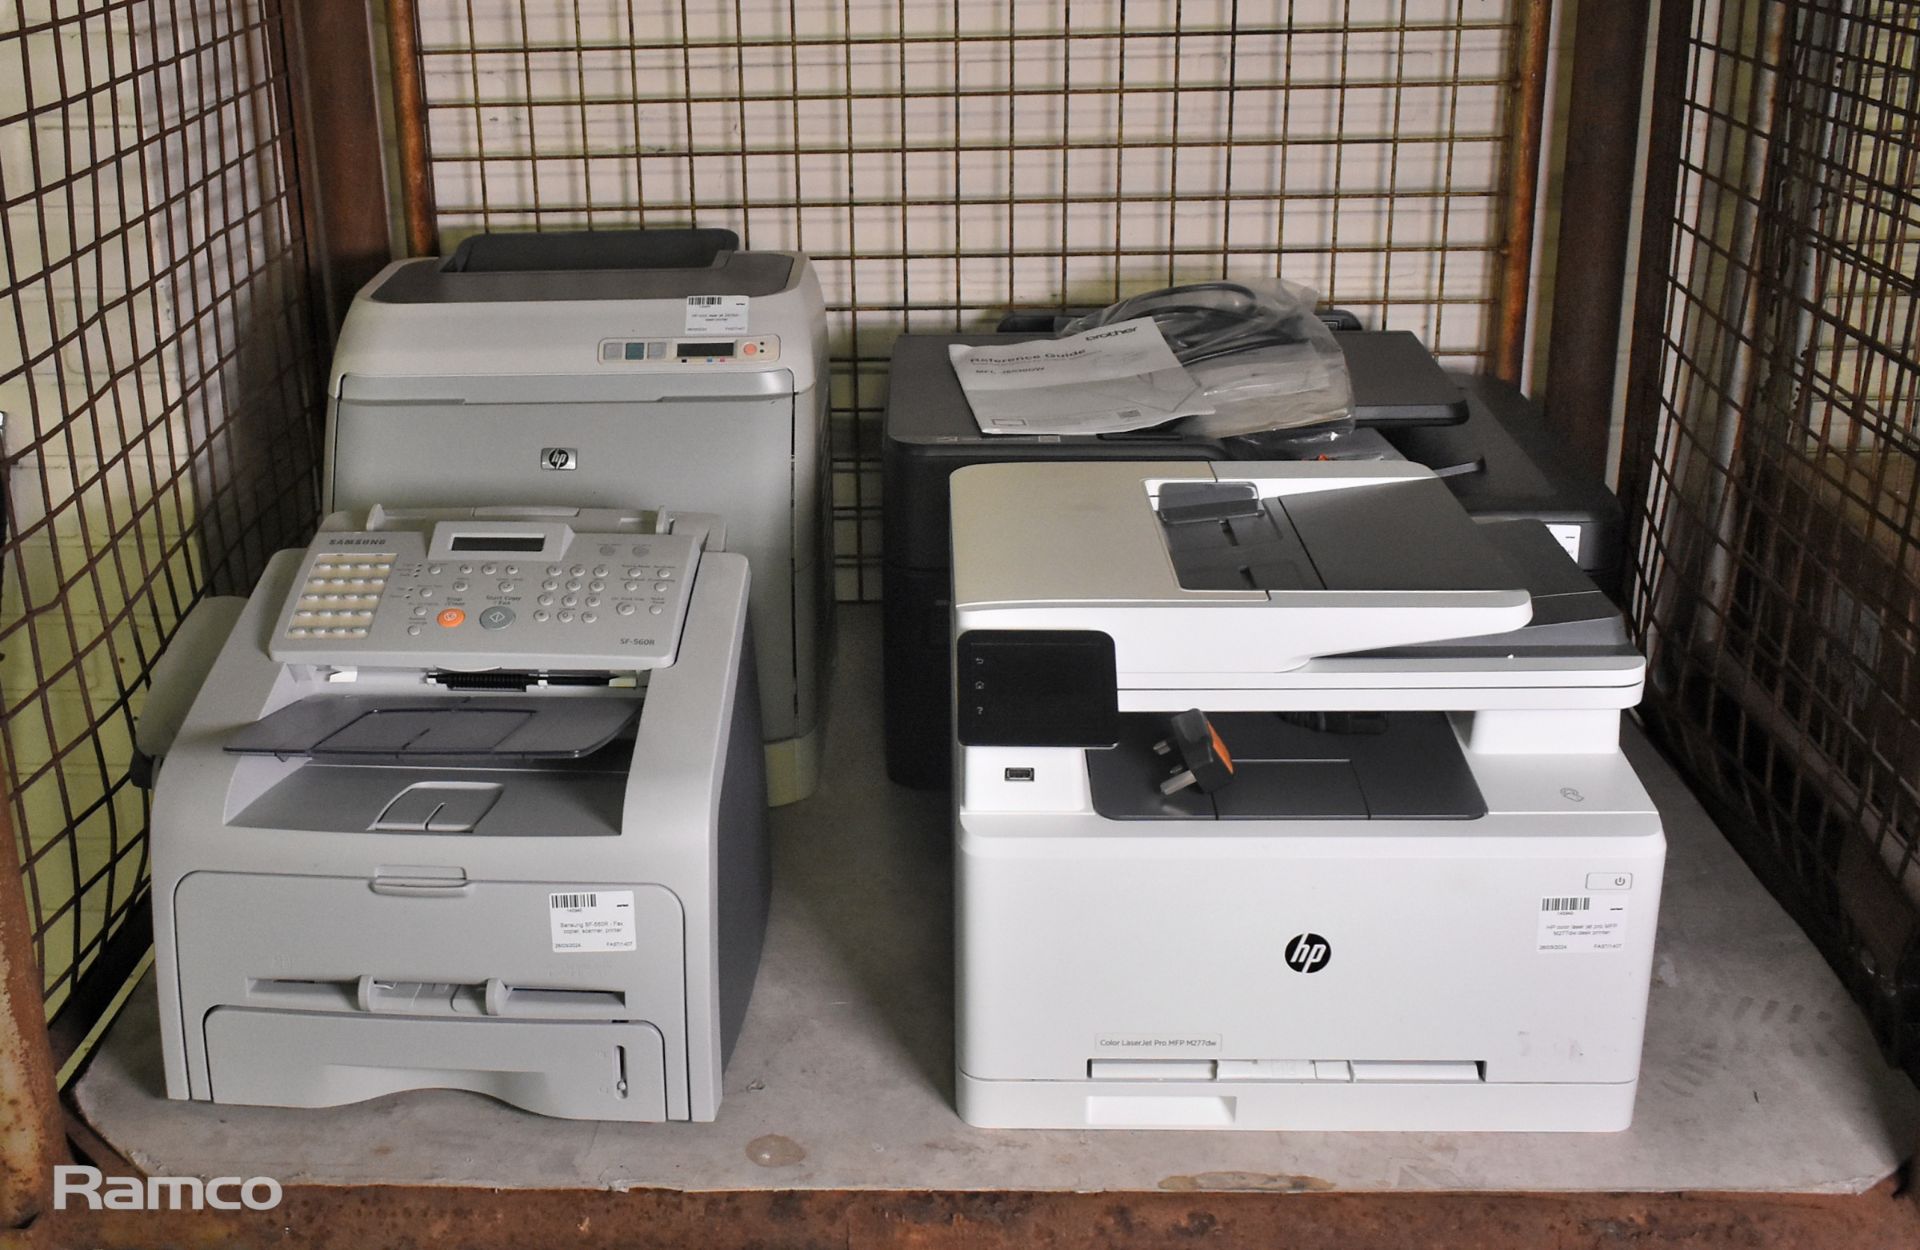 Brother, HP & Samsung printers - see desc. for full details